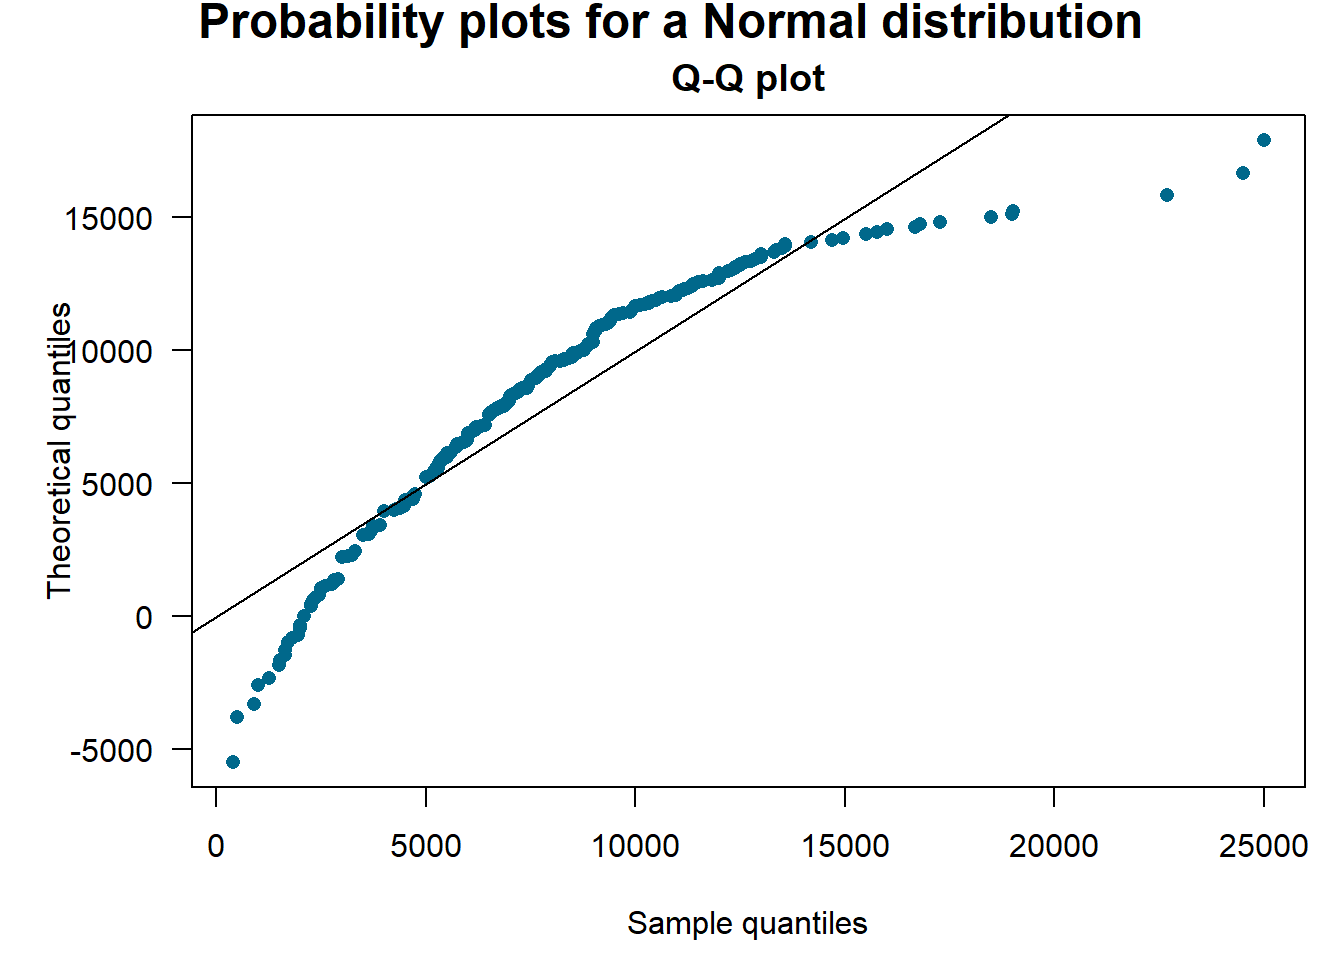 Quantile-Quantile (\(qq\)) Plots for Bodily Injury Claims. The horizontal axis gives the empirical quantiles at each observation. The vertical axis gives the quantiles from the fitted distributions; lognormal quantiles are in the left panels, normal quantiles are in the right panels.